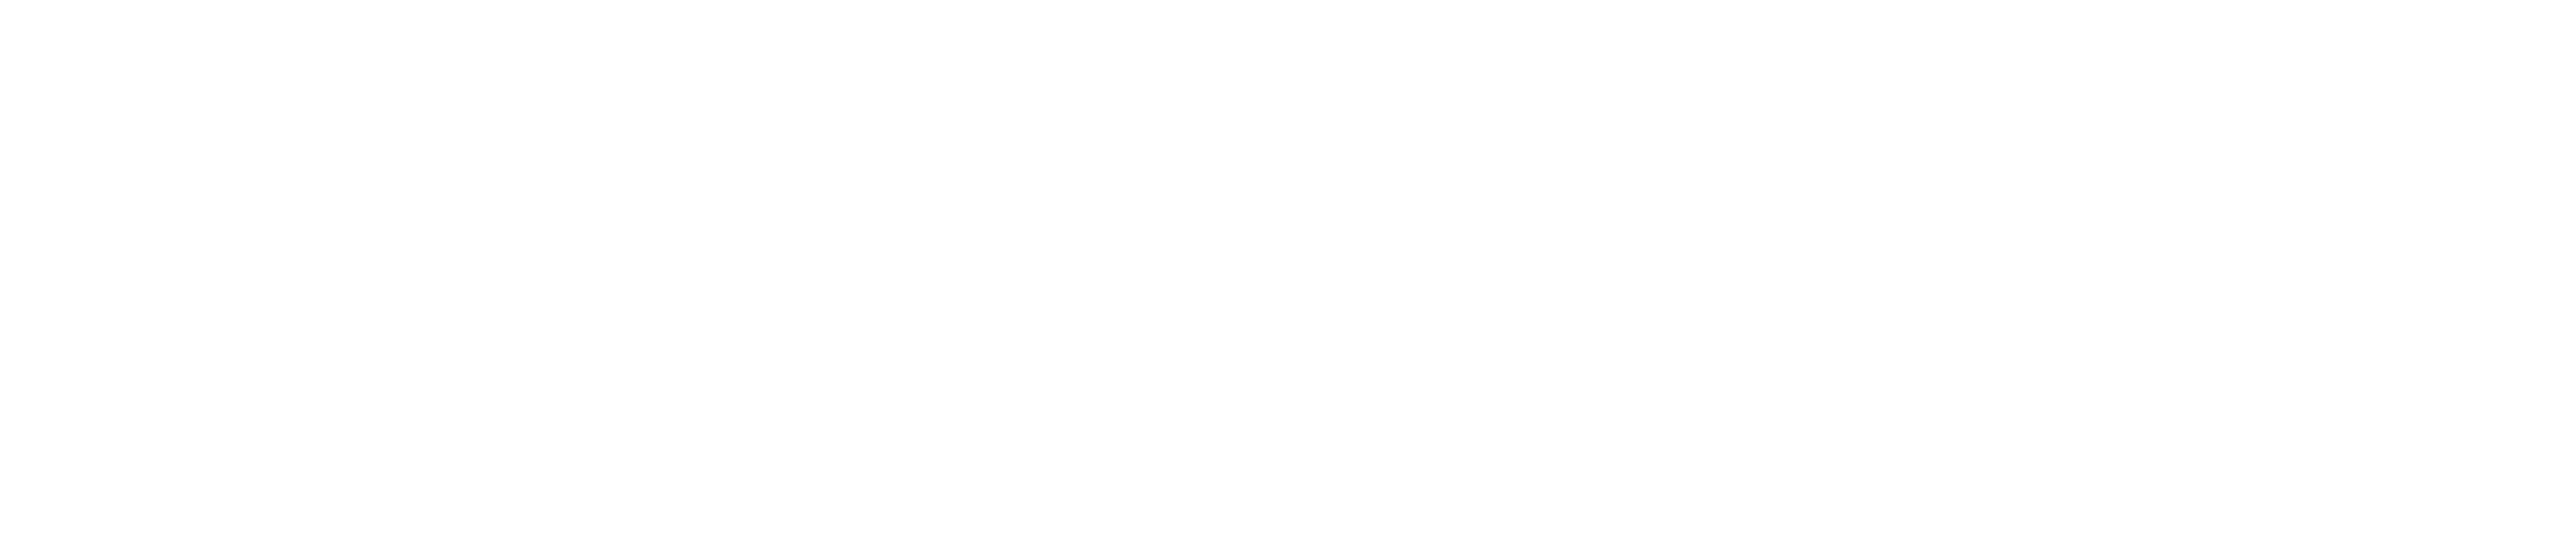 AAA-Lex Offices - Sustainable Building Support